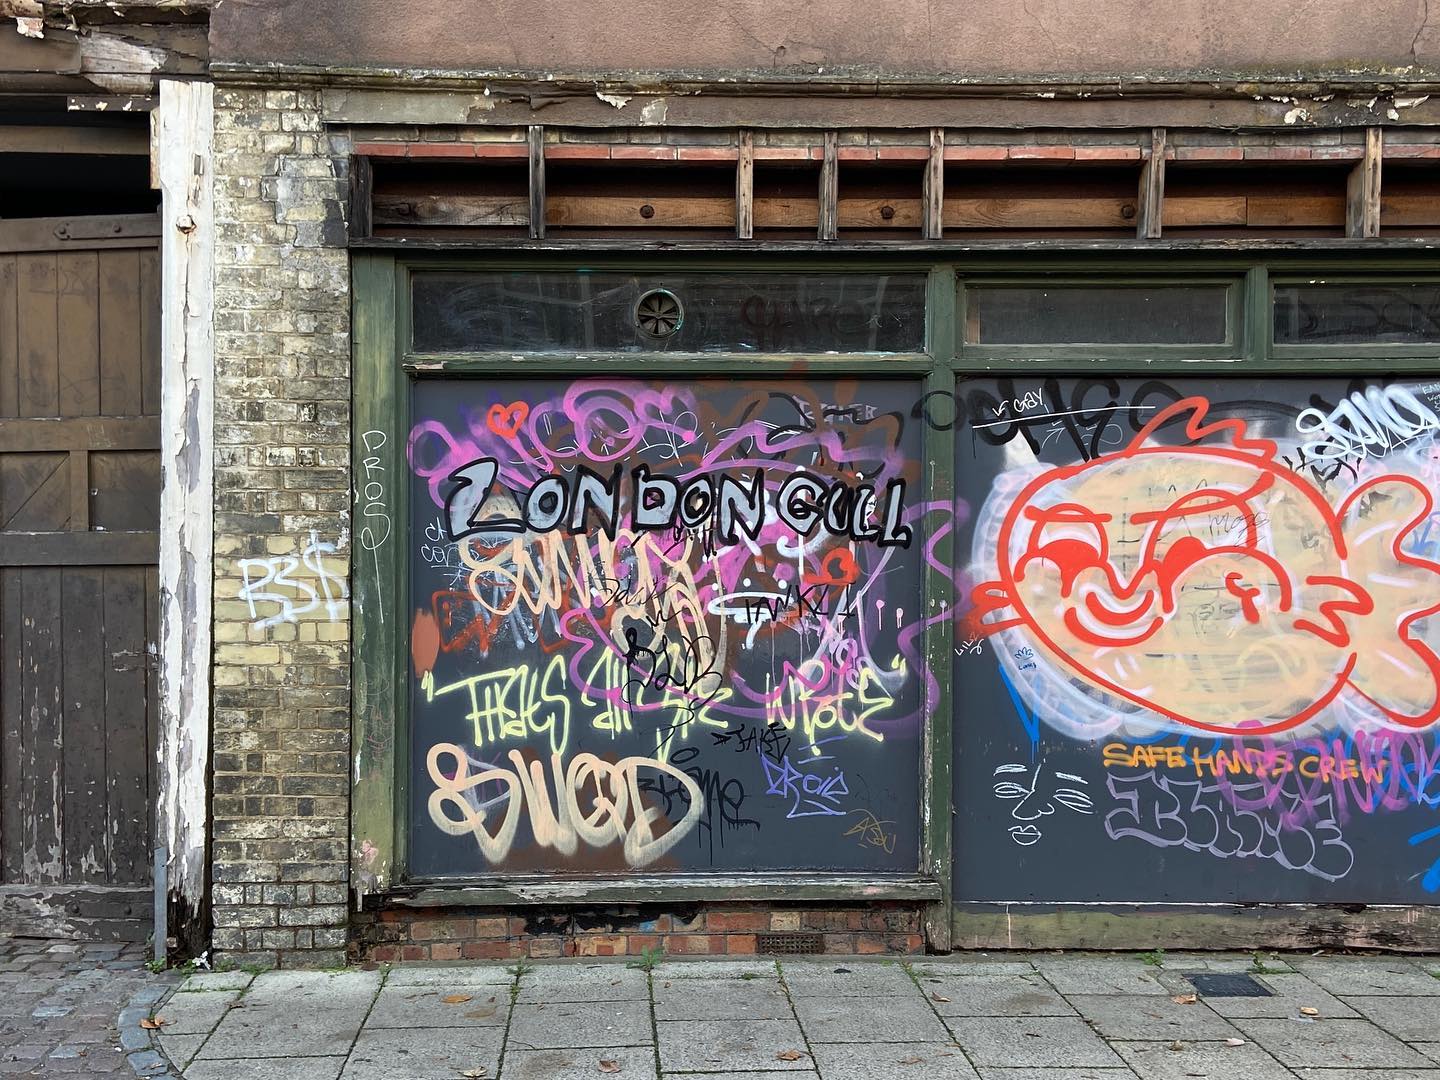 LONDON GULL scrawled on scrawls in pastel rainbow, rotting wall just about supporting